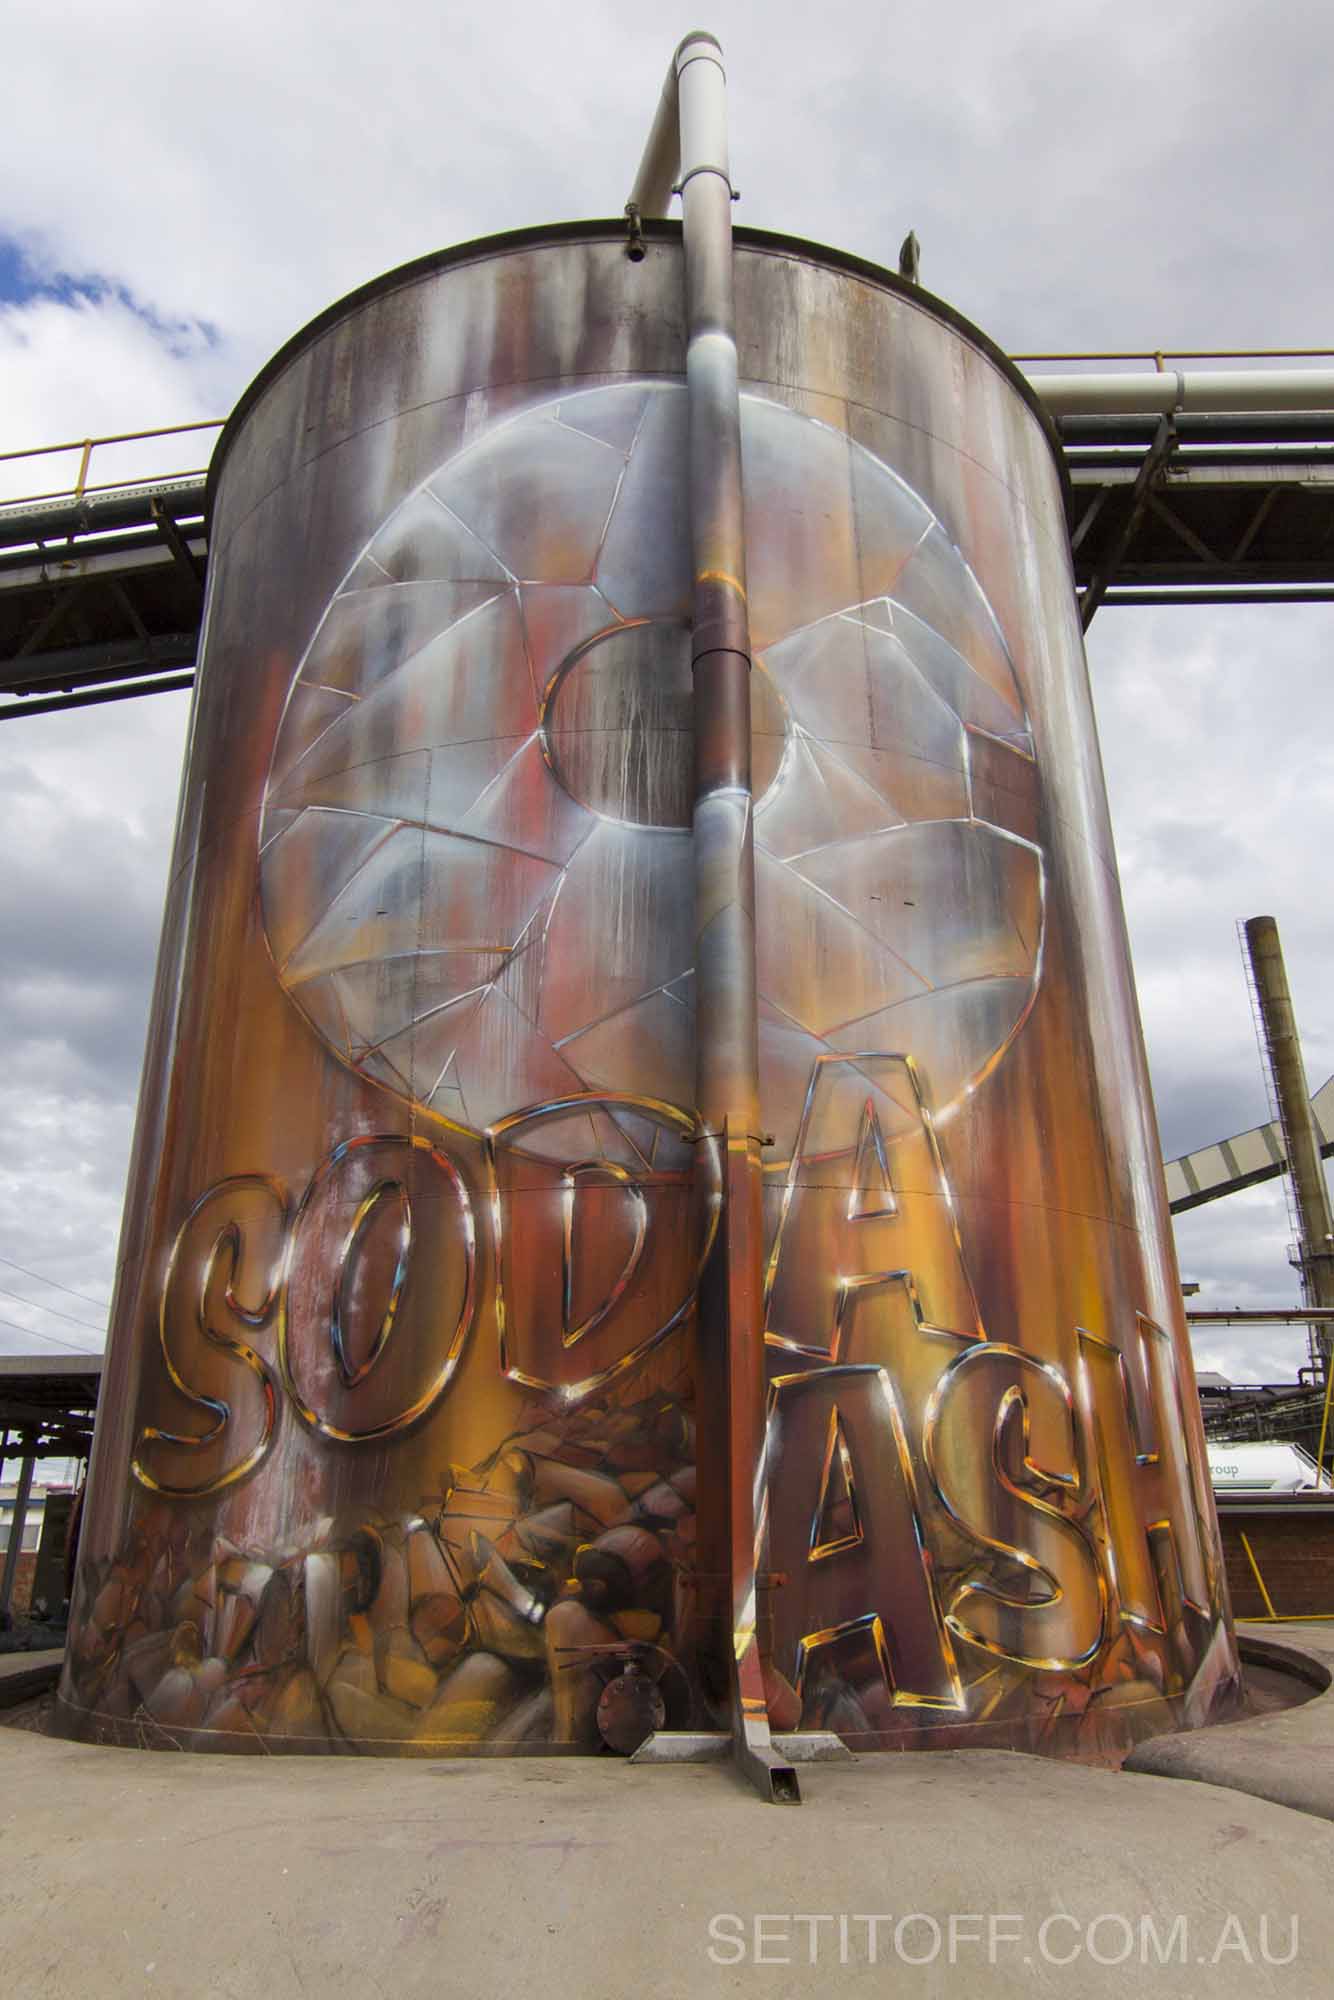 Old, industrial silos are restored with graffiti art representing the company that owns them.